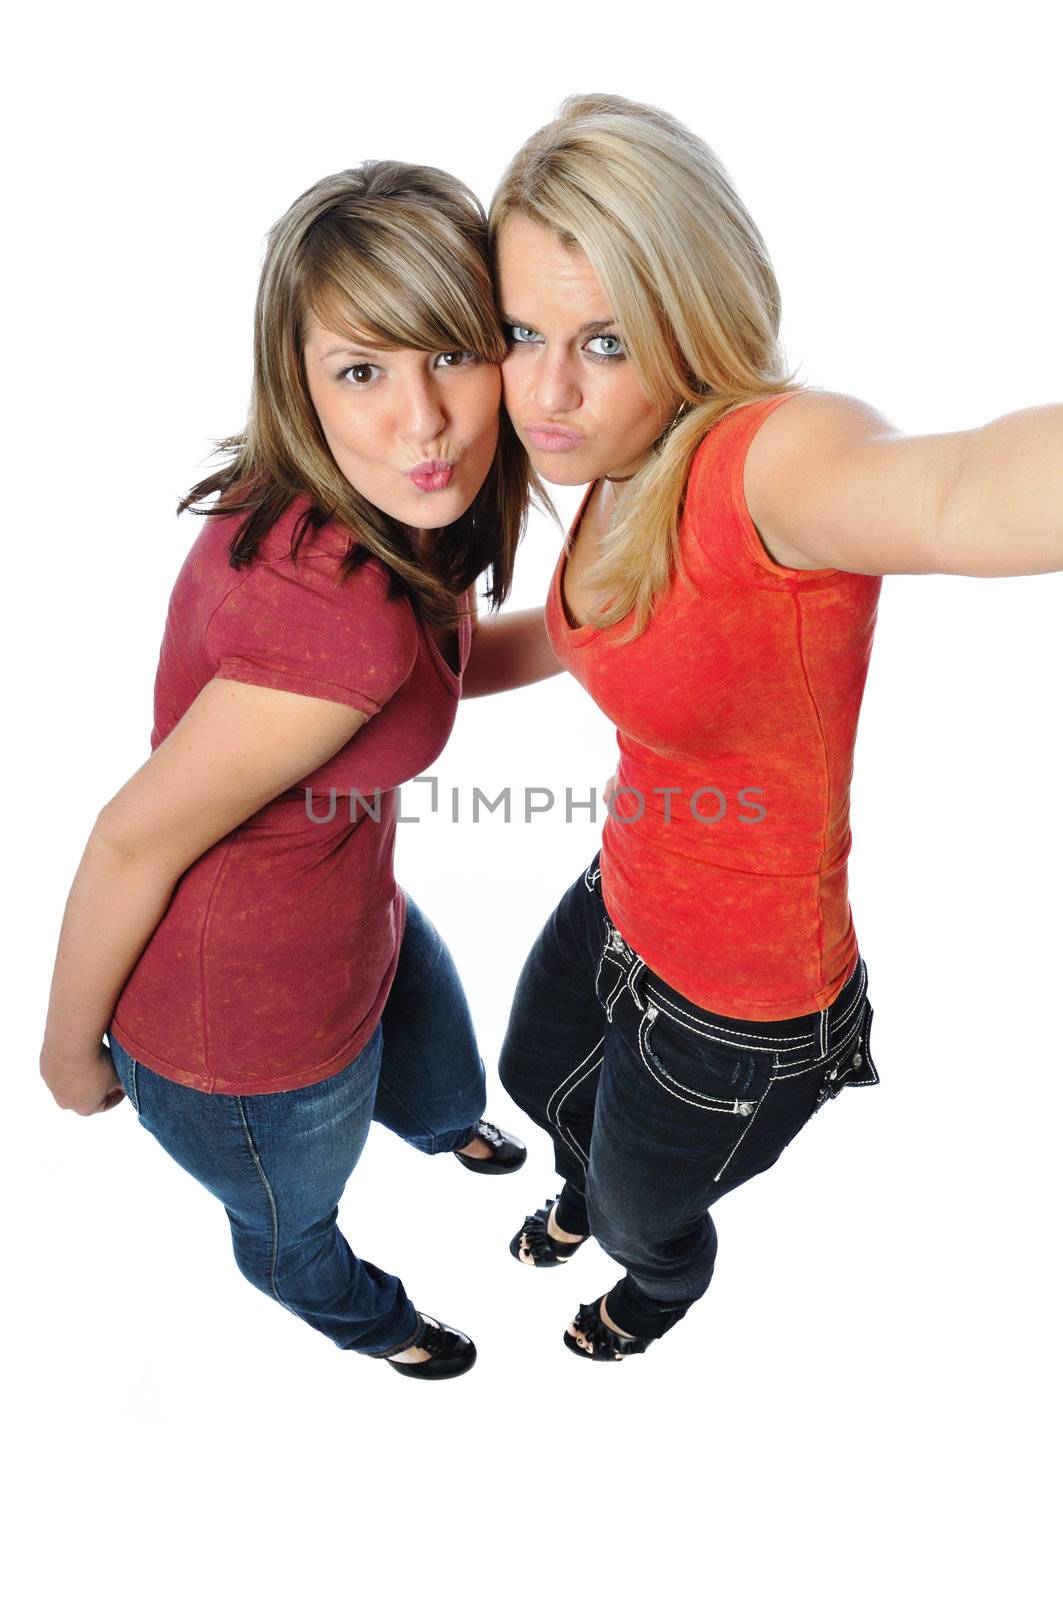 two friends posing together on a white background